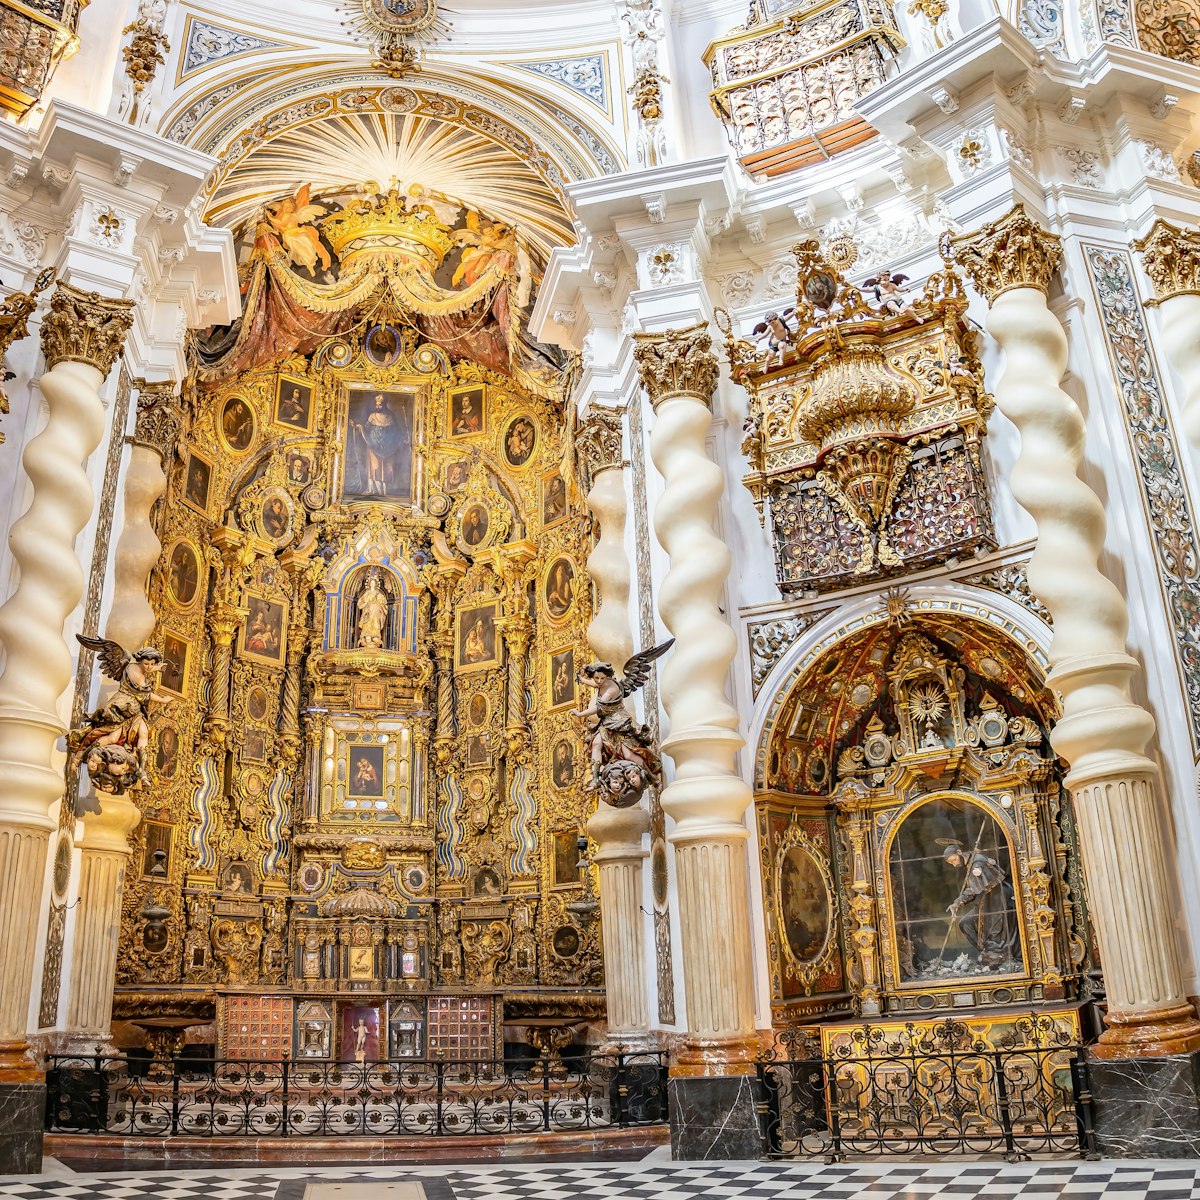 Altarpiece inside the Church of San Luis de los Franceses of baroque architecture from the 18th century in the historic center of Seville, Andalusia, Spain.